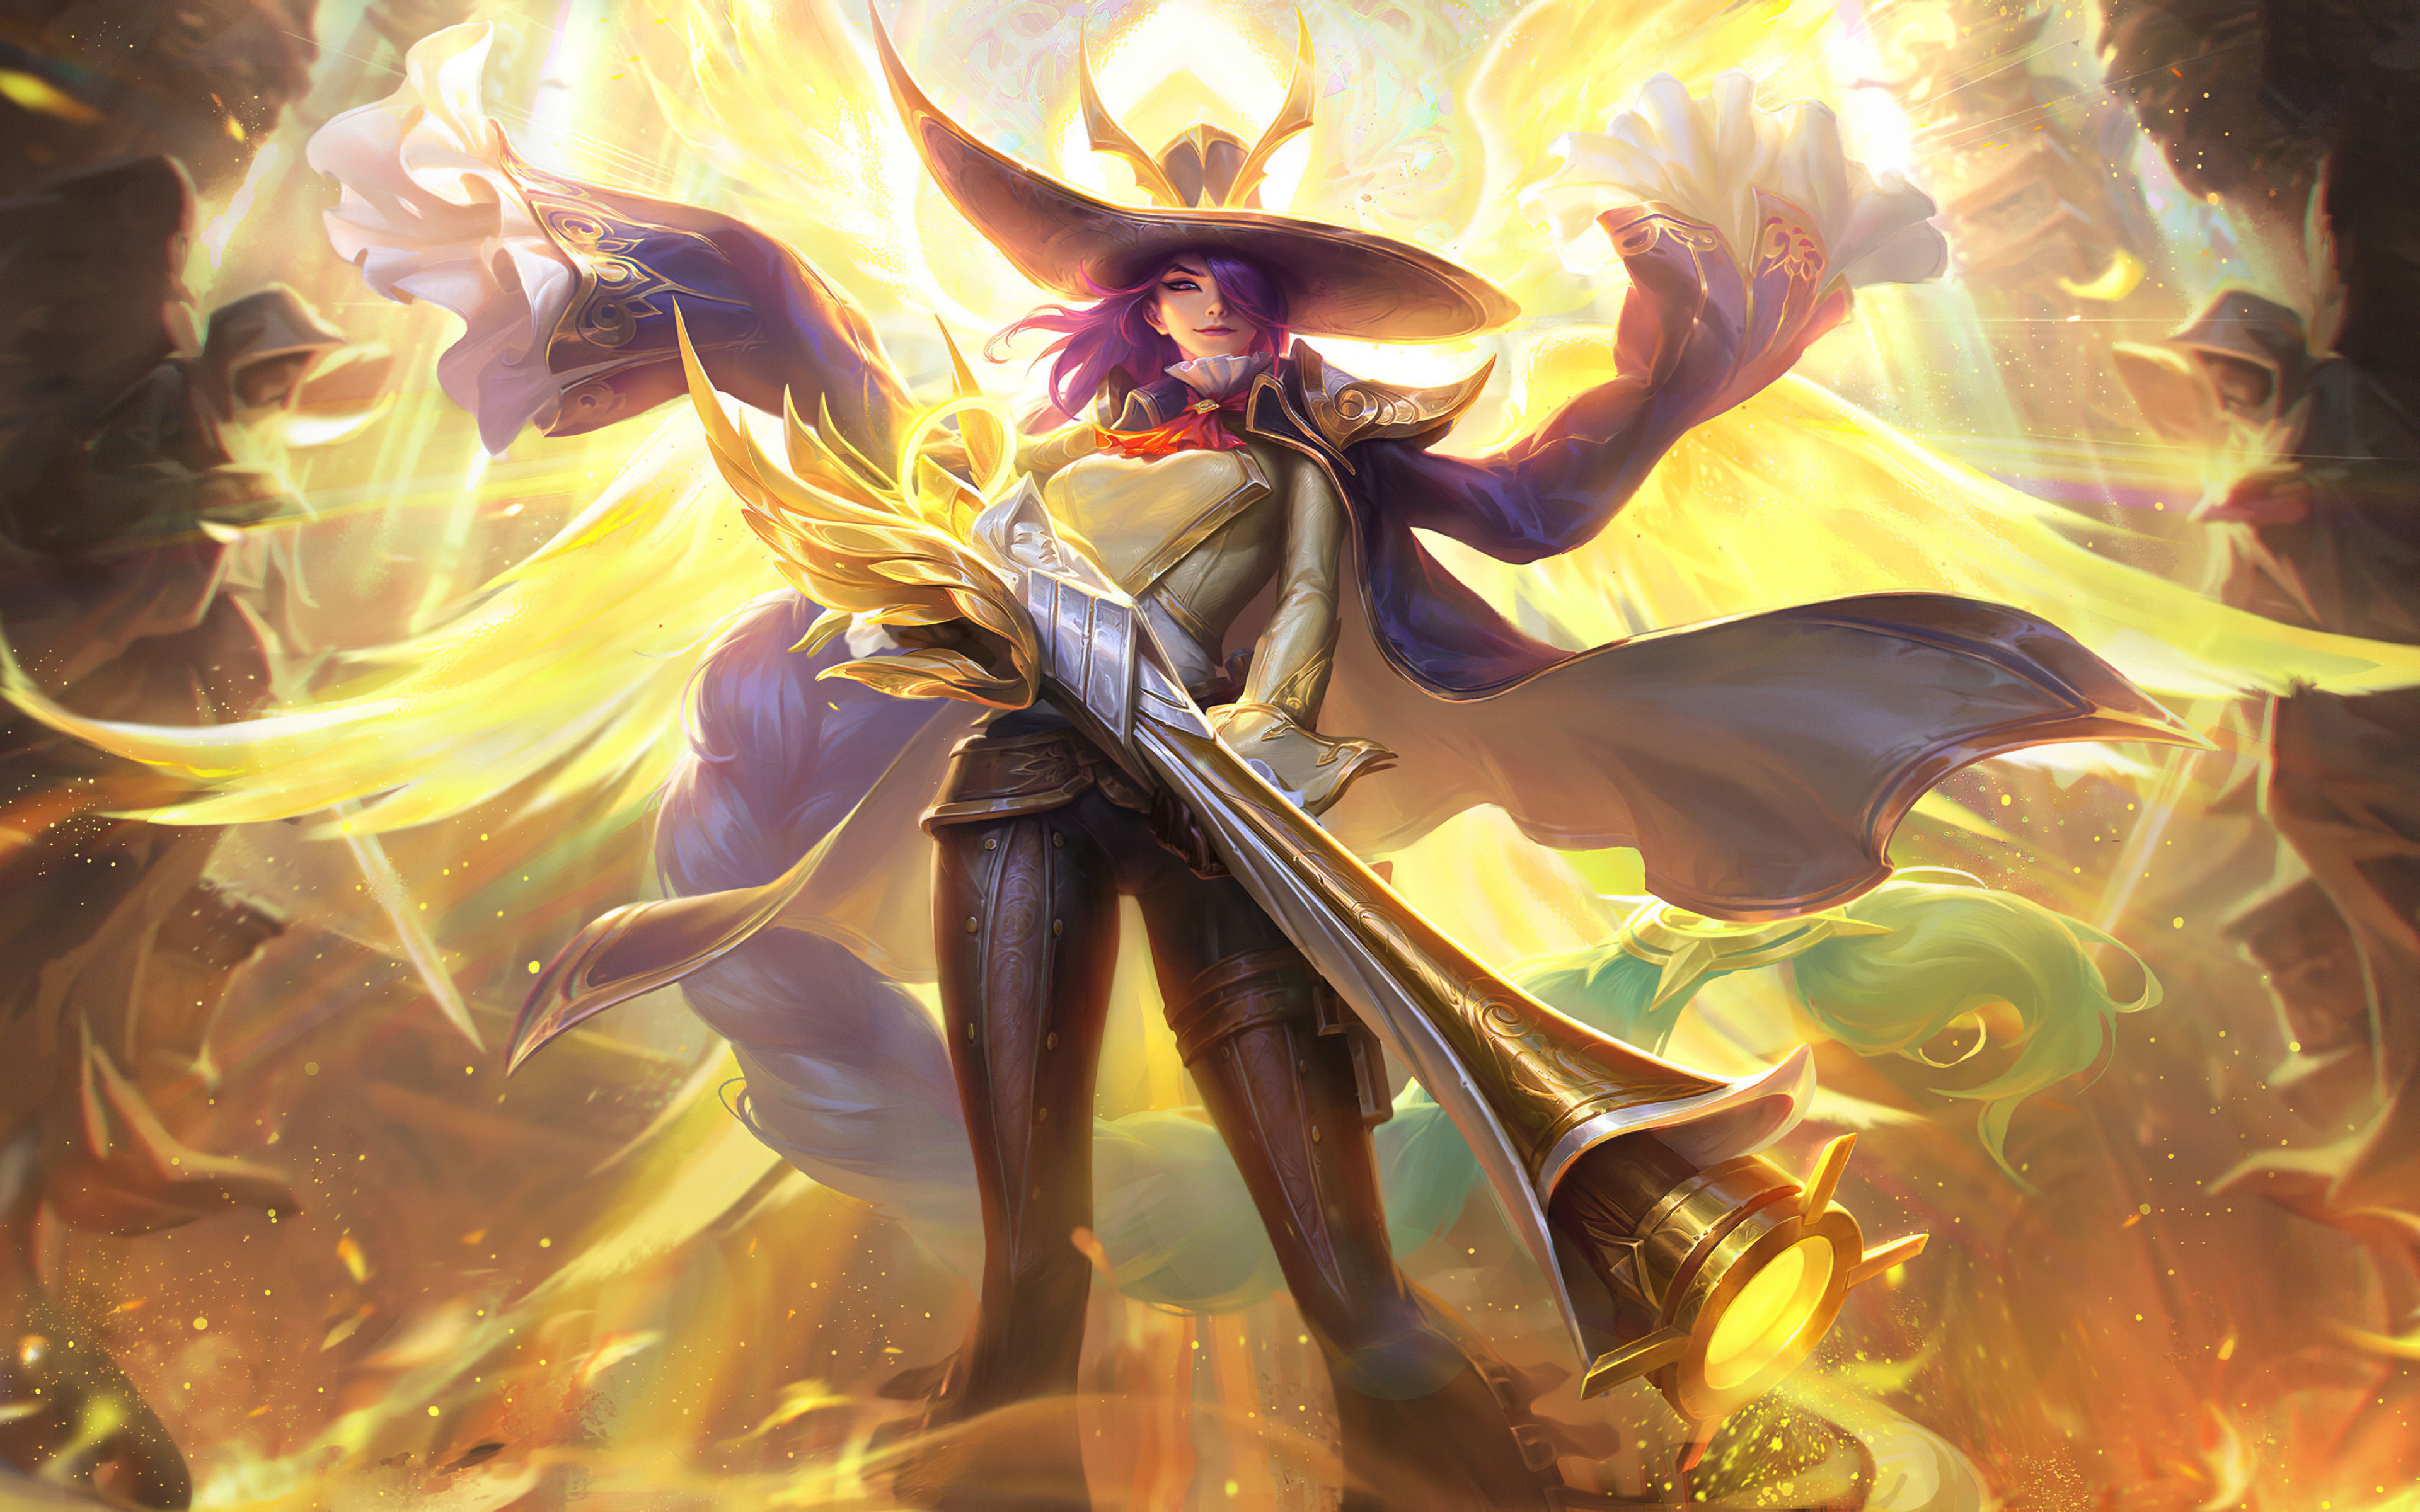 Character from Mobile Legends Wallpapers 4k Ultra HD ID:4729